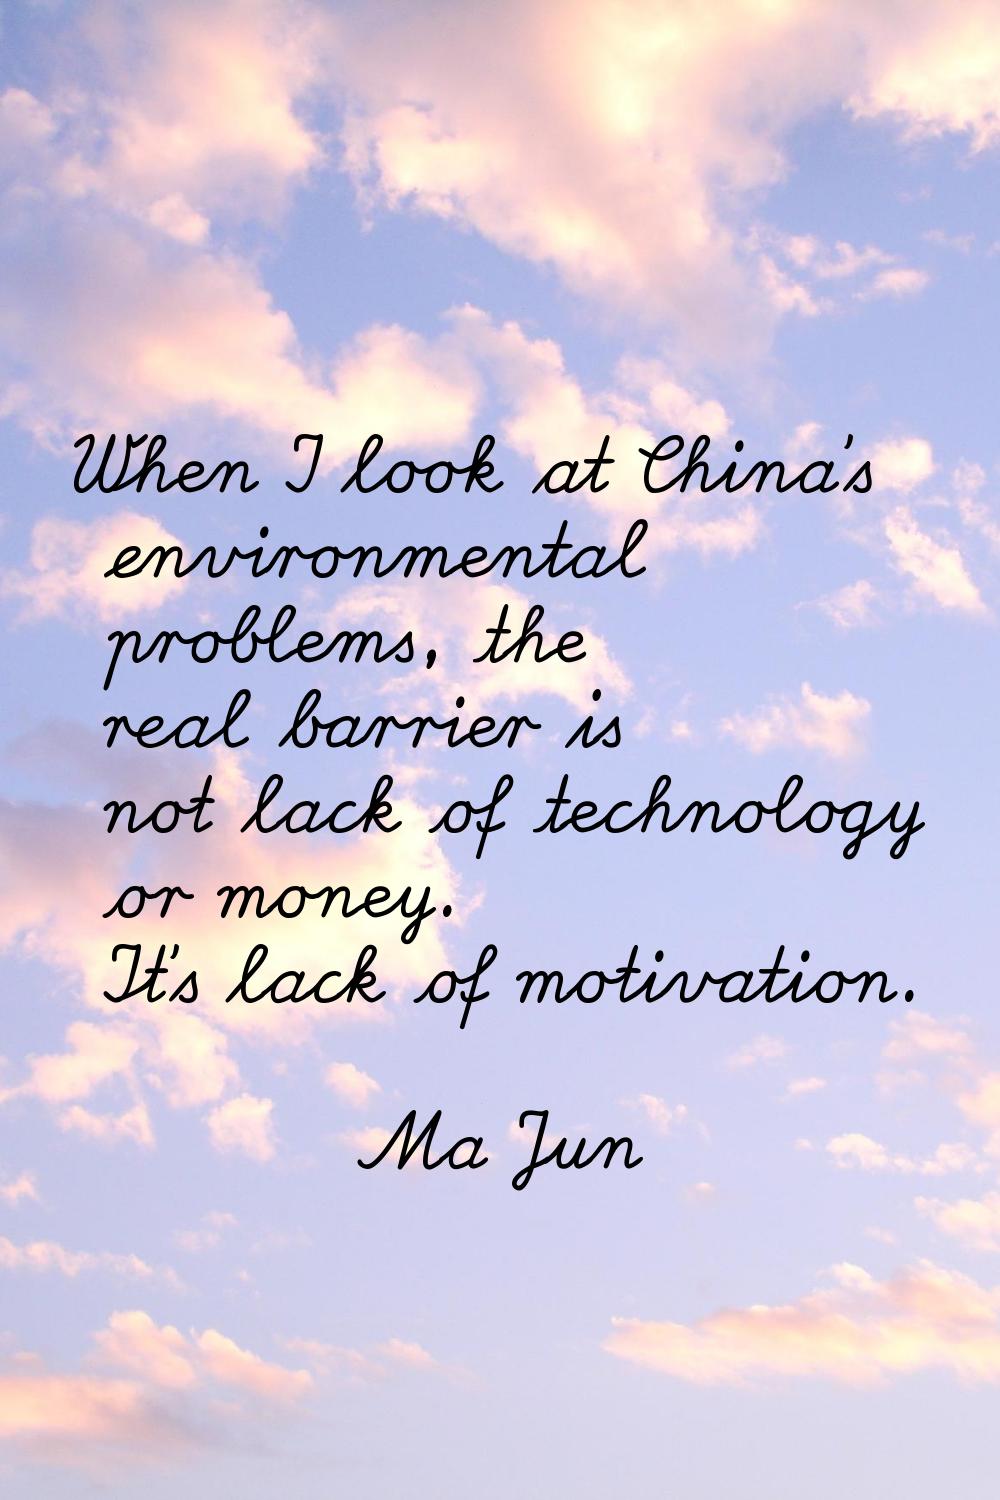 When I look at China's environmental problems, the real barrier is not lack of technology or money.